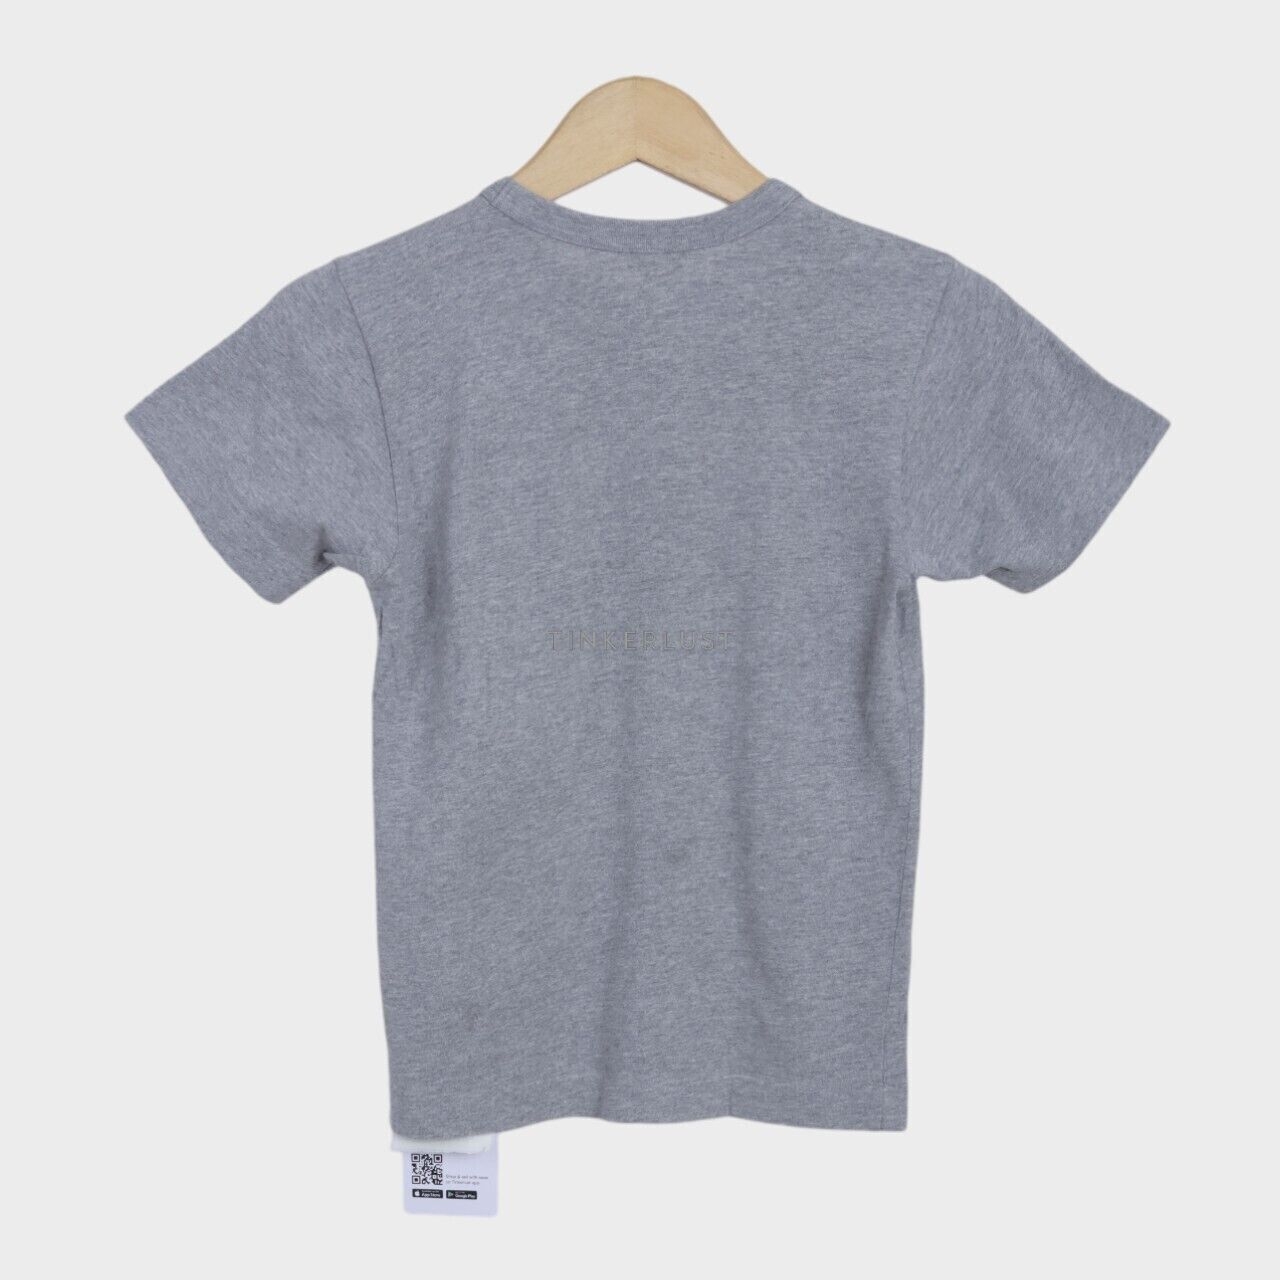 Play Comme des Garcons Gold Heart Grey Tshirt